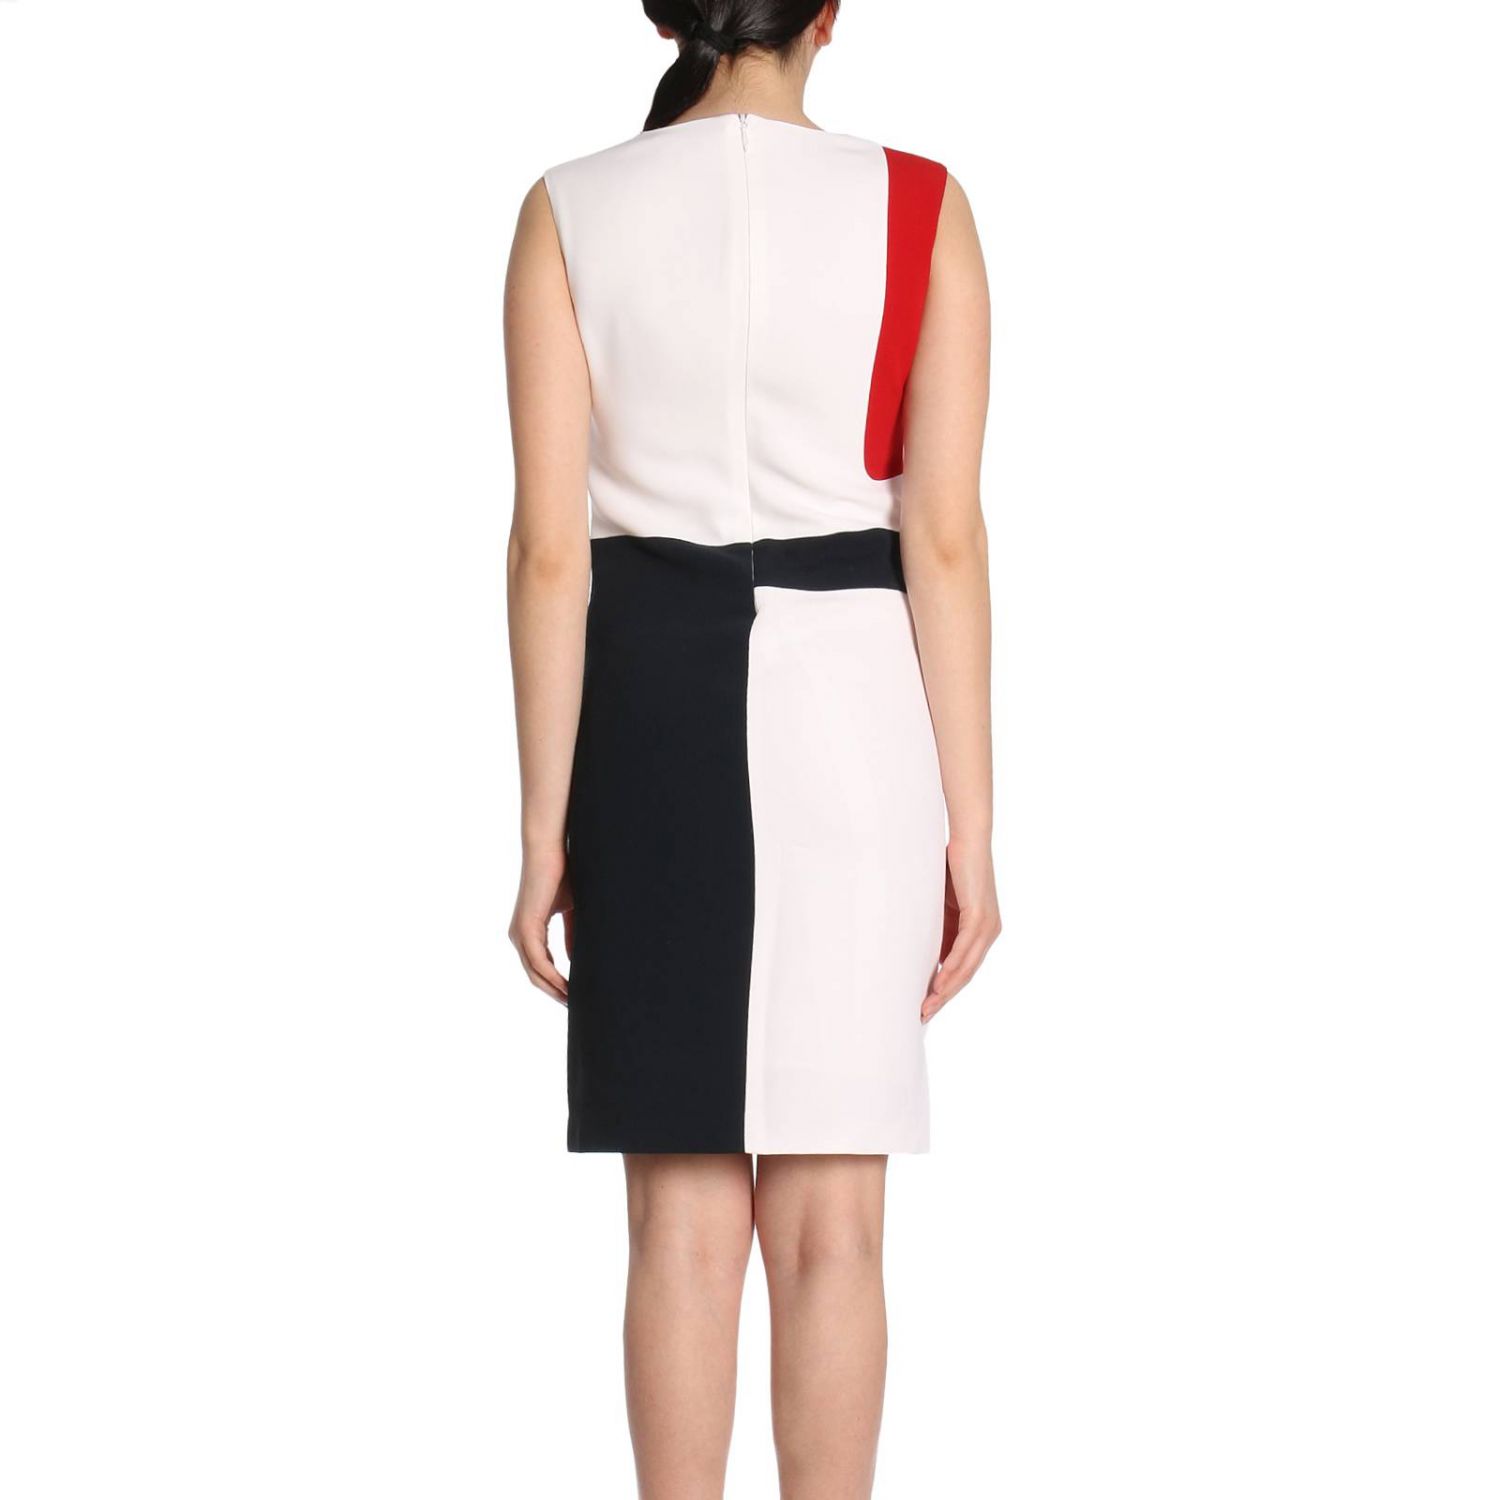 Fay Outlet: Dress women - White | Dress Fay N8WE336559M MHO GIGLIO.COM